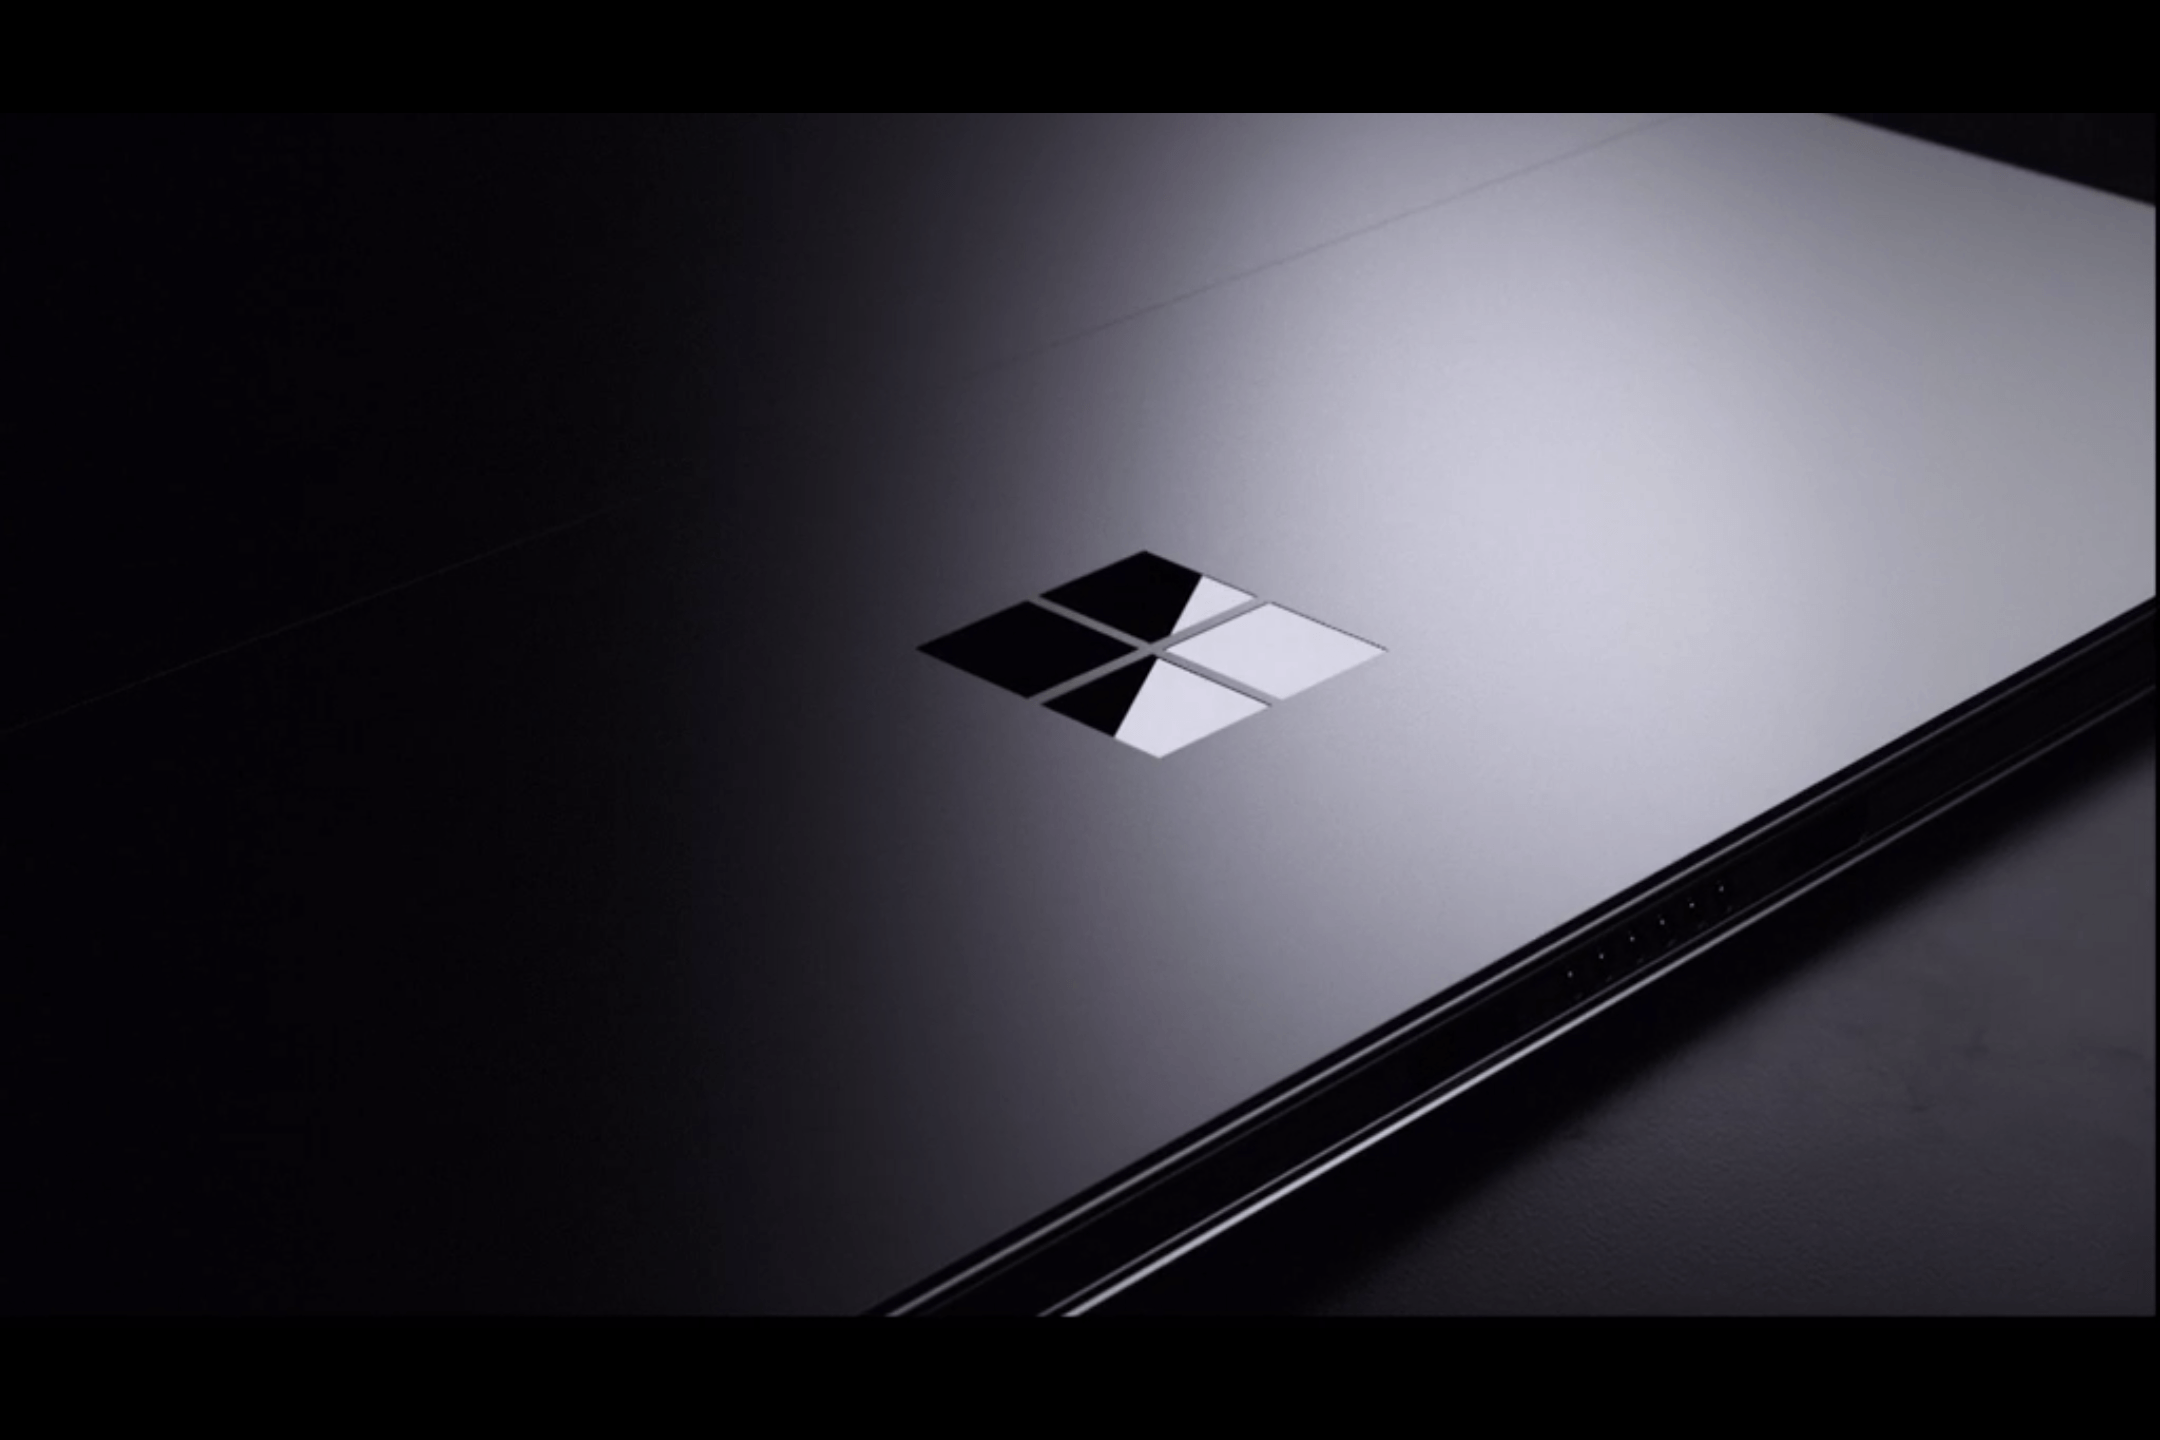 Microsoft Surface Pro 4 Logo - Microsoft's $899 Surface Pro 4 is thin and fast, with Skylake and an